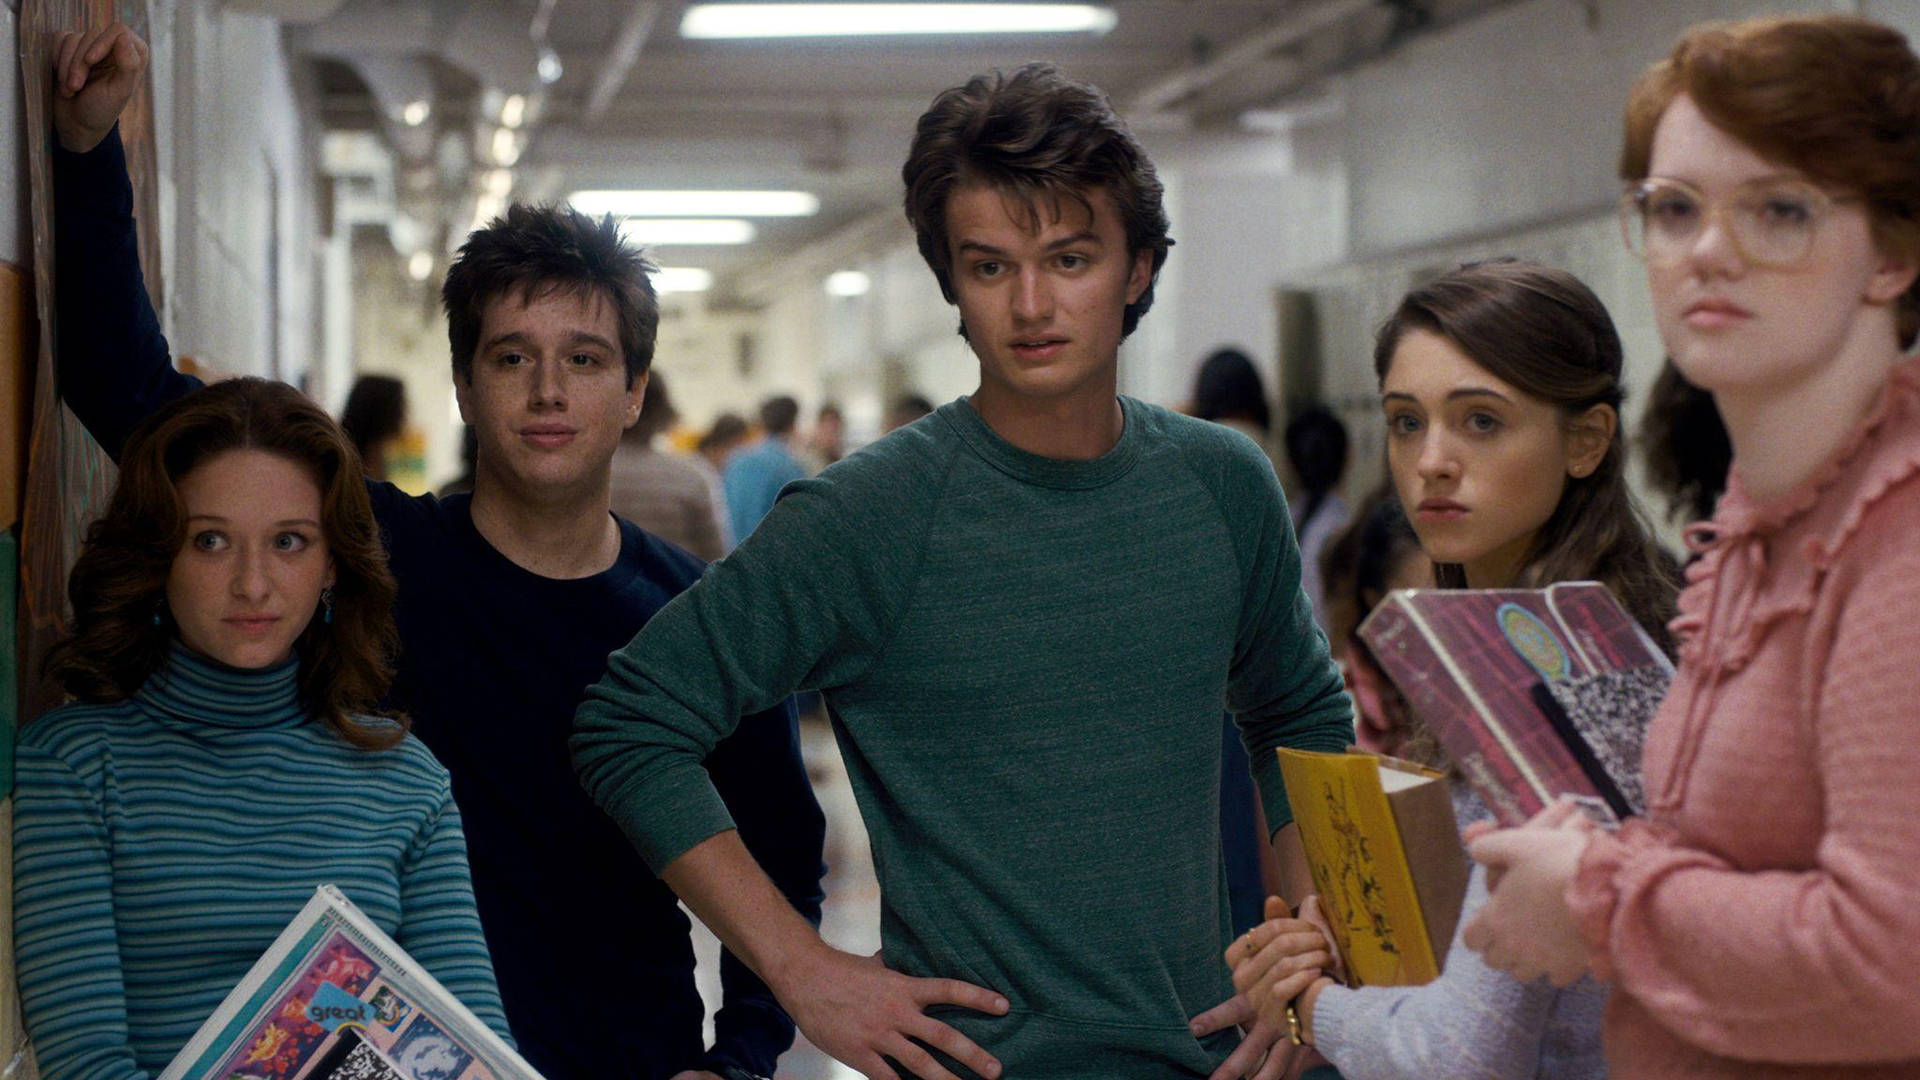 Joe Keery With His Classmates Background